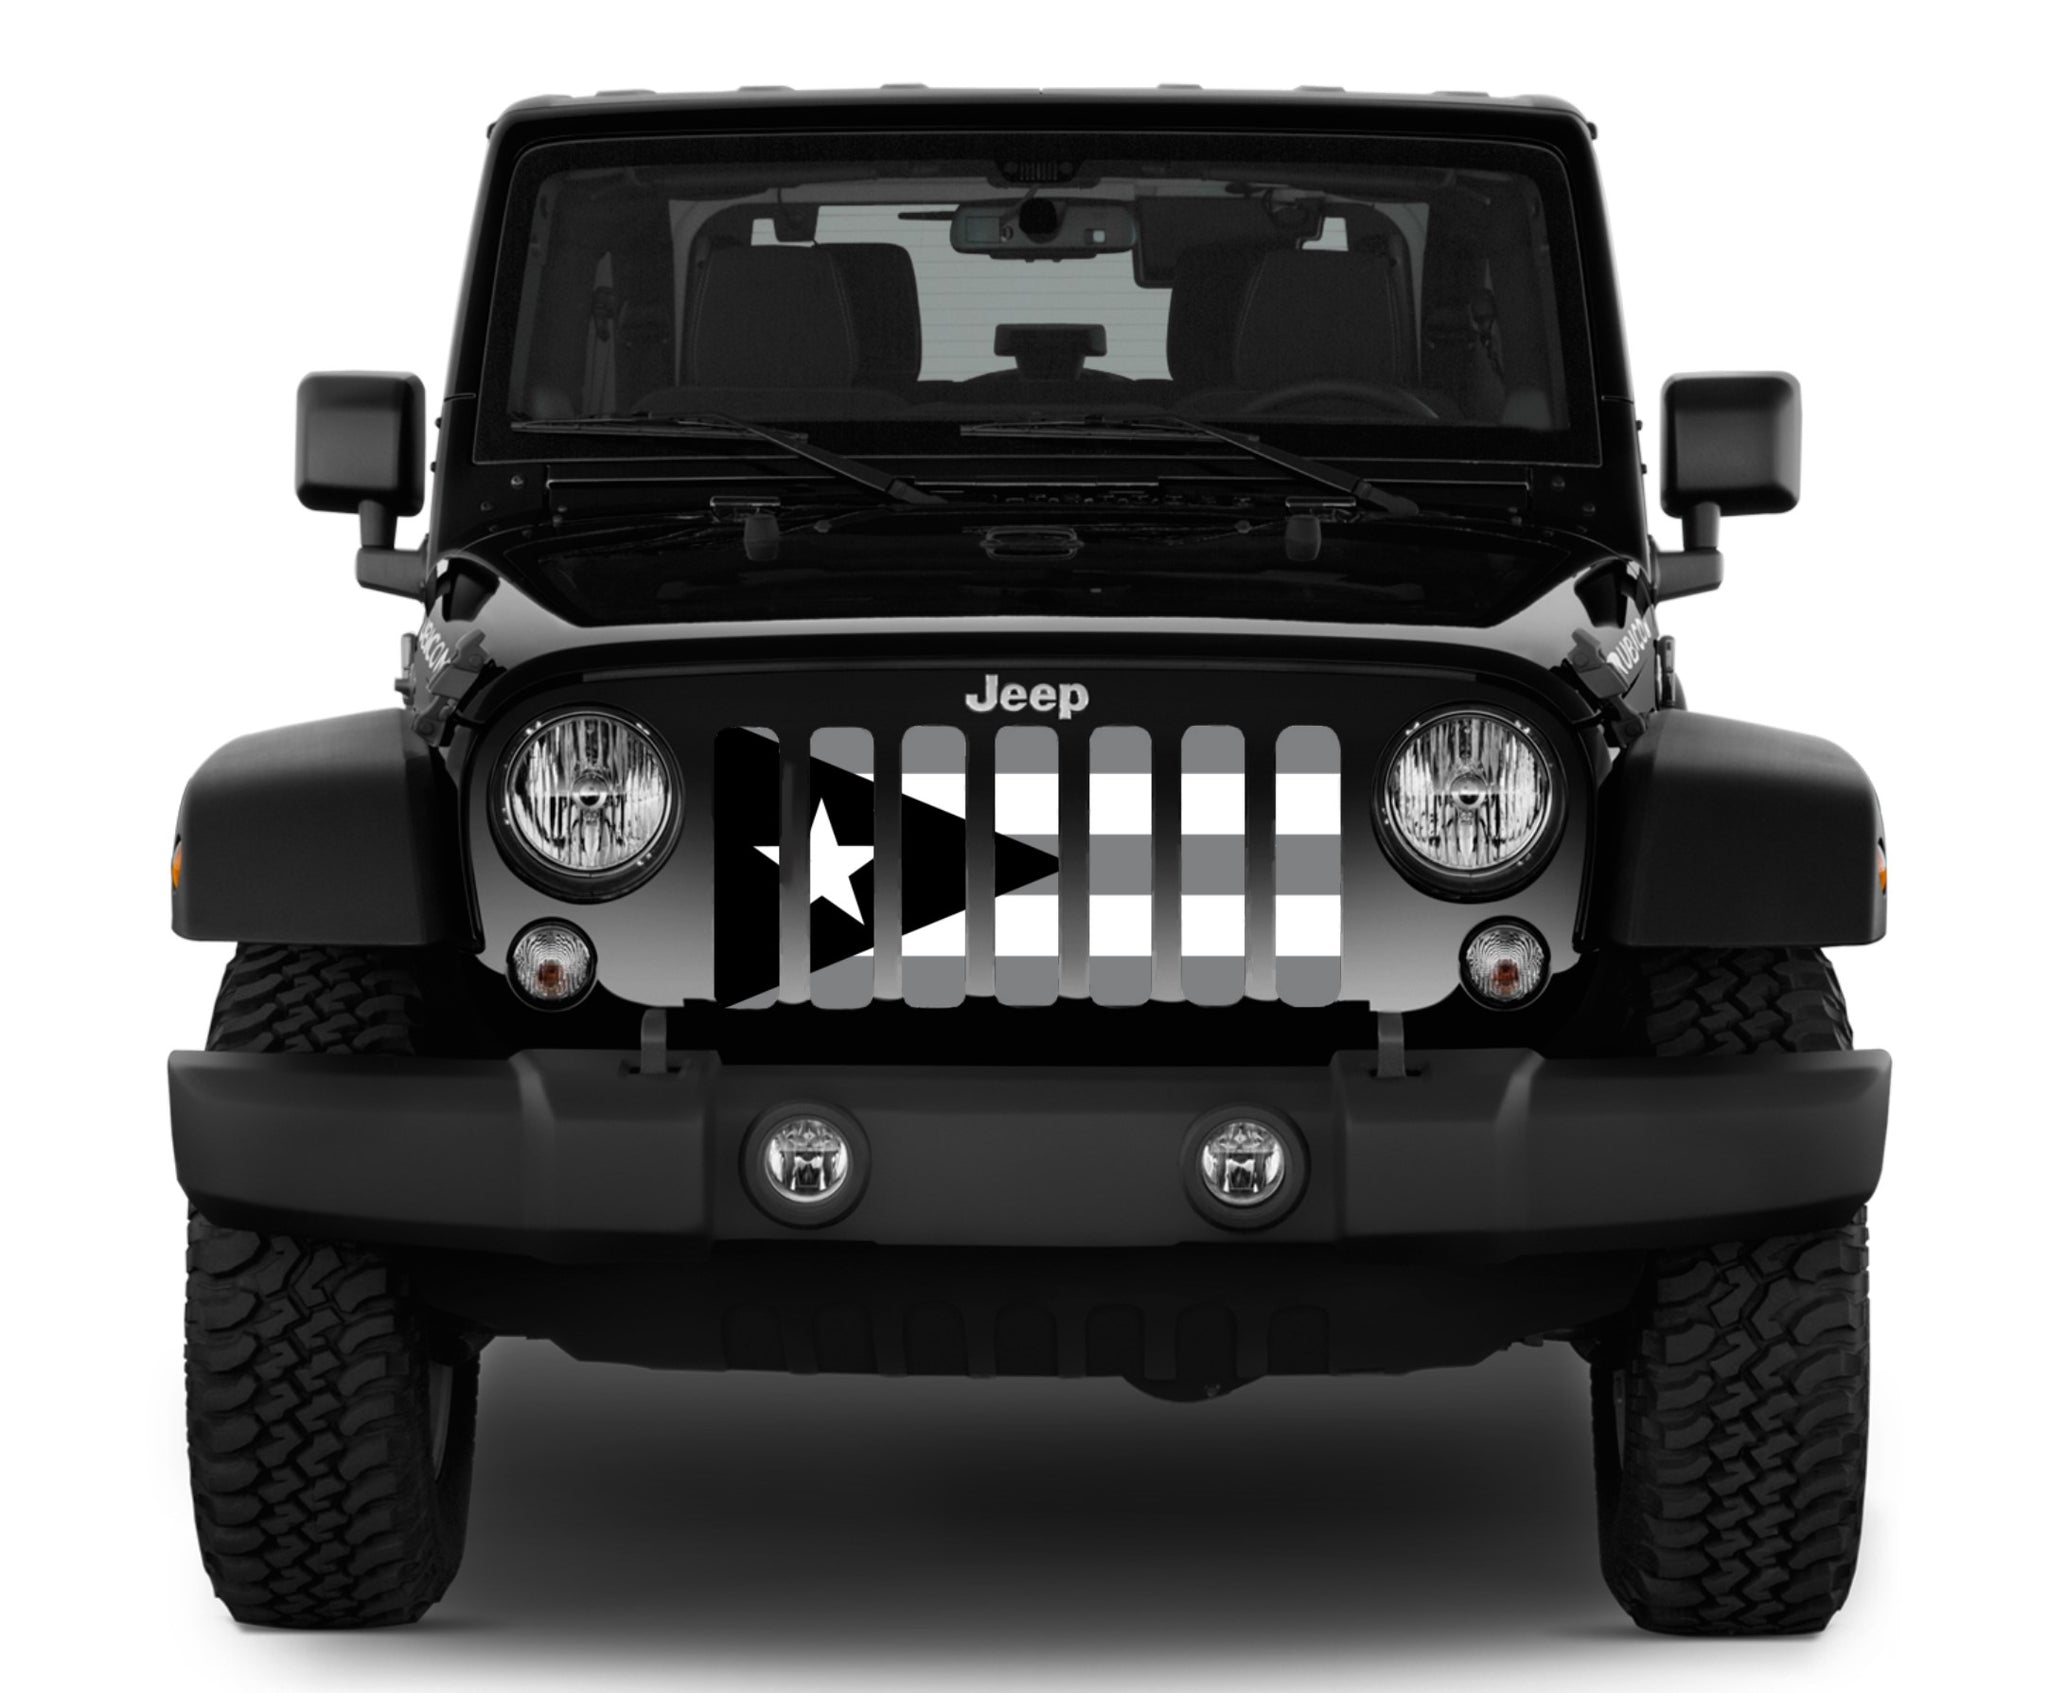 Jeep Wrangler Puerto Rico Tactical Flag Grille Insert | Dirty Acres